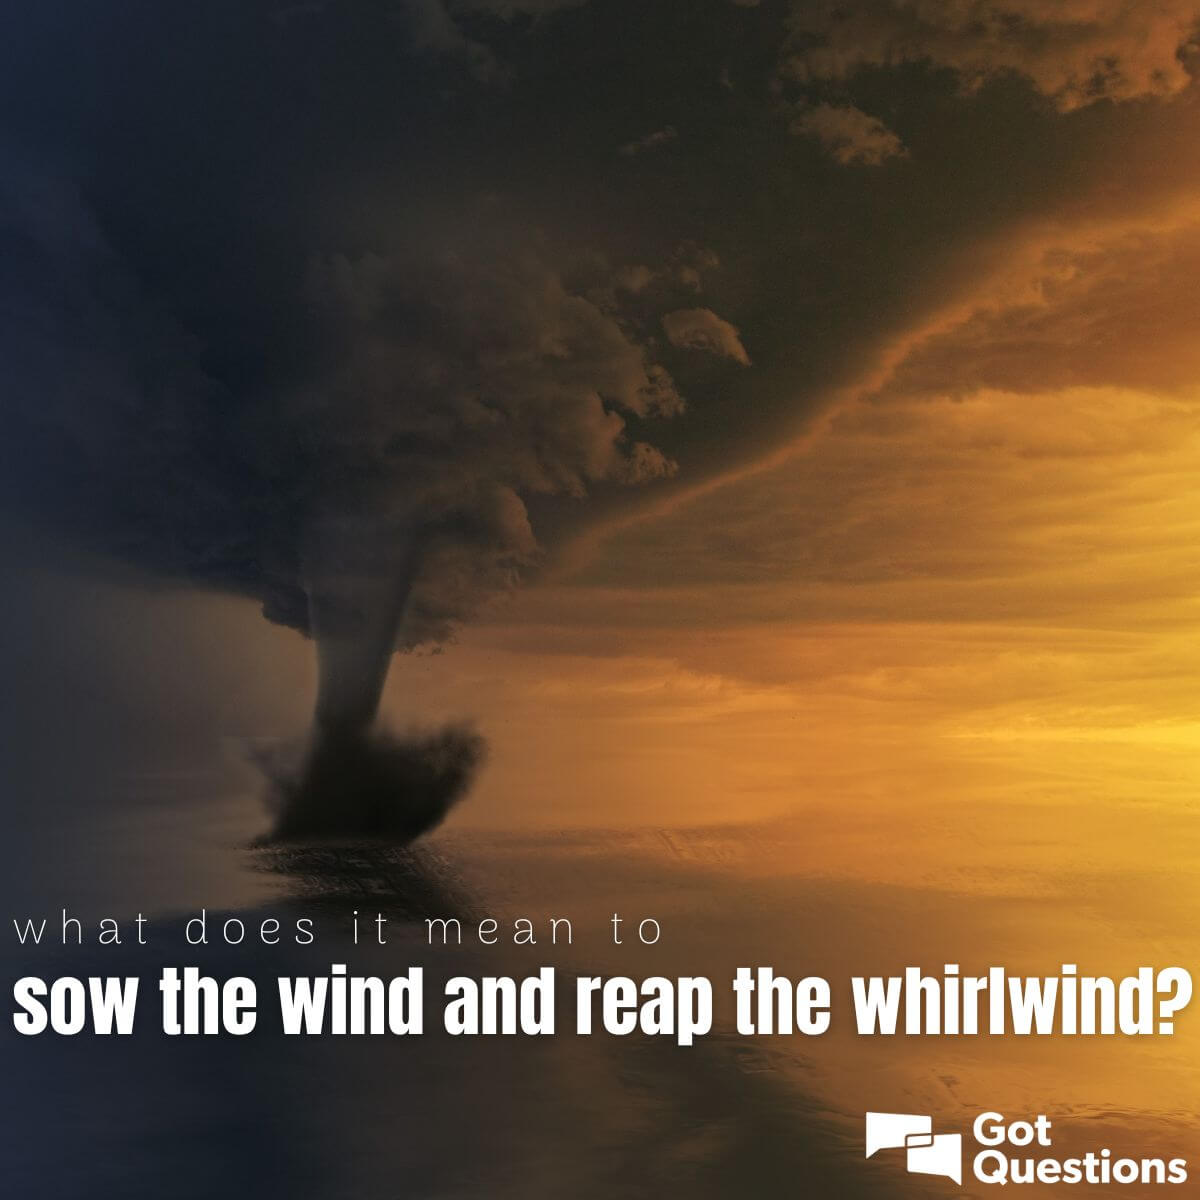 What does it mean to sow the wind and reap the whirlwind